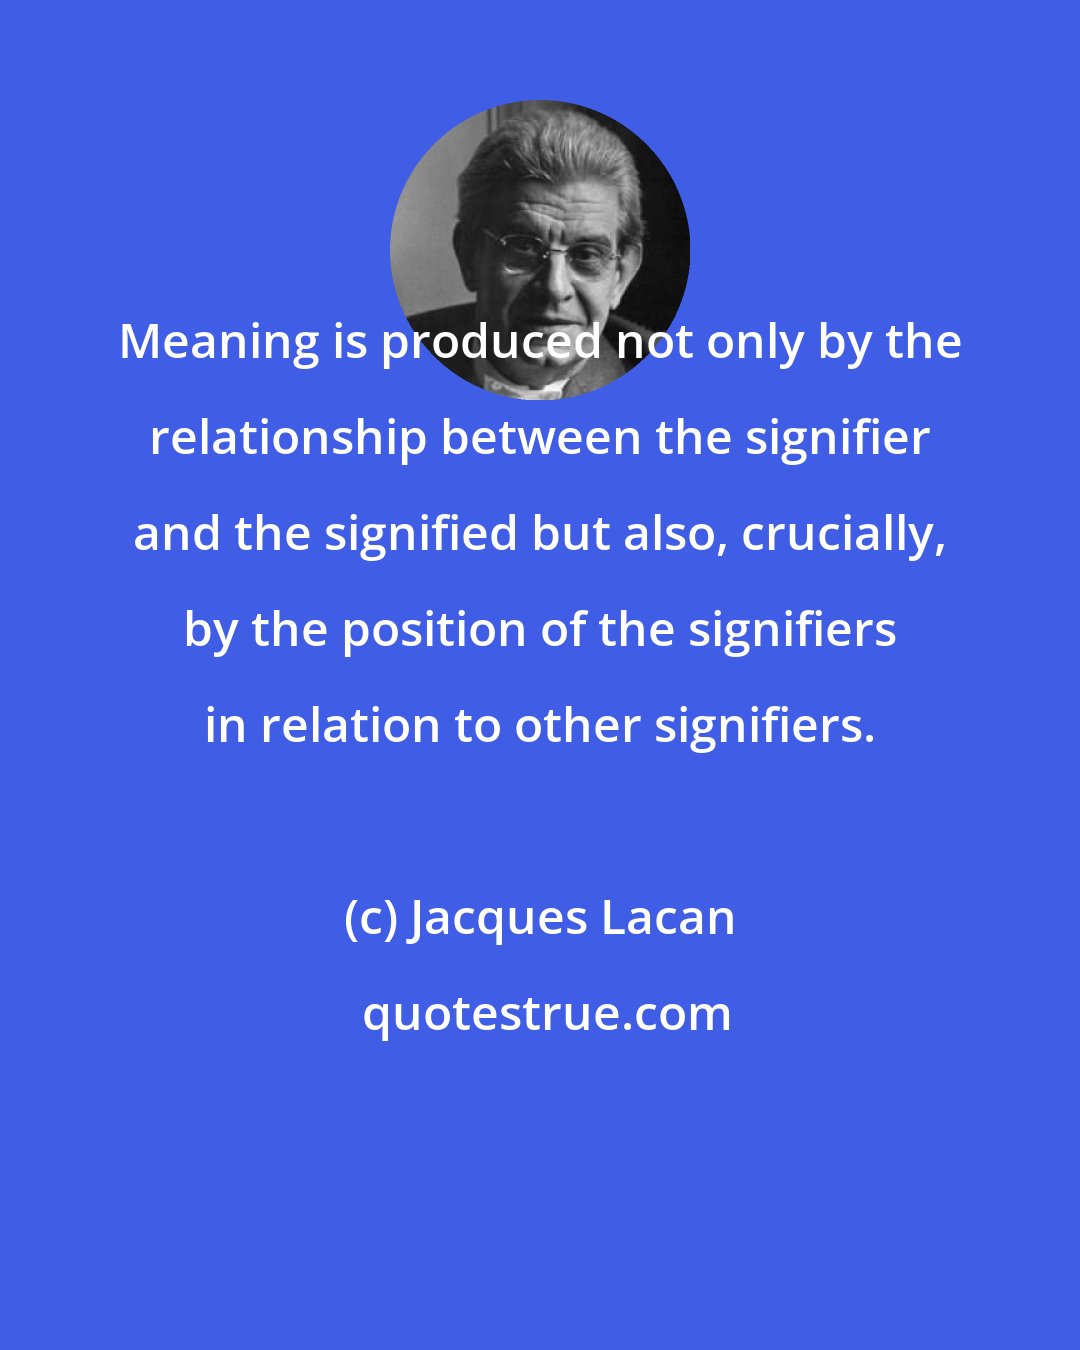 Jacques Lacan: Meaning is produced not only by the relationship between the signifier and the signified but also, crucially, by the position of the signifiers in relation to other signifiers.